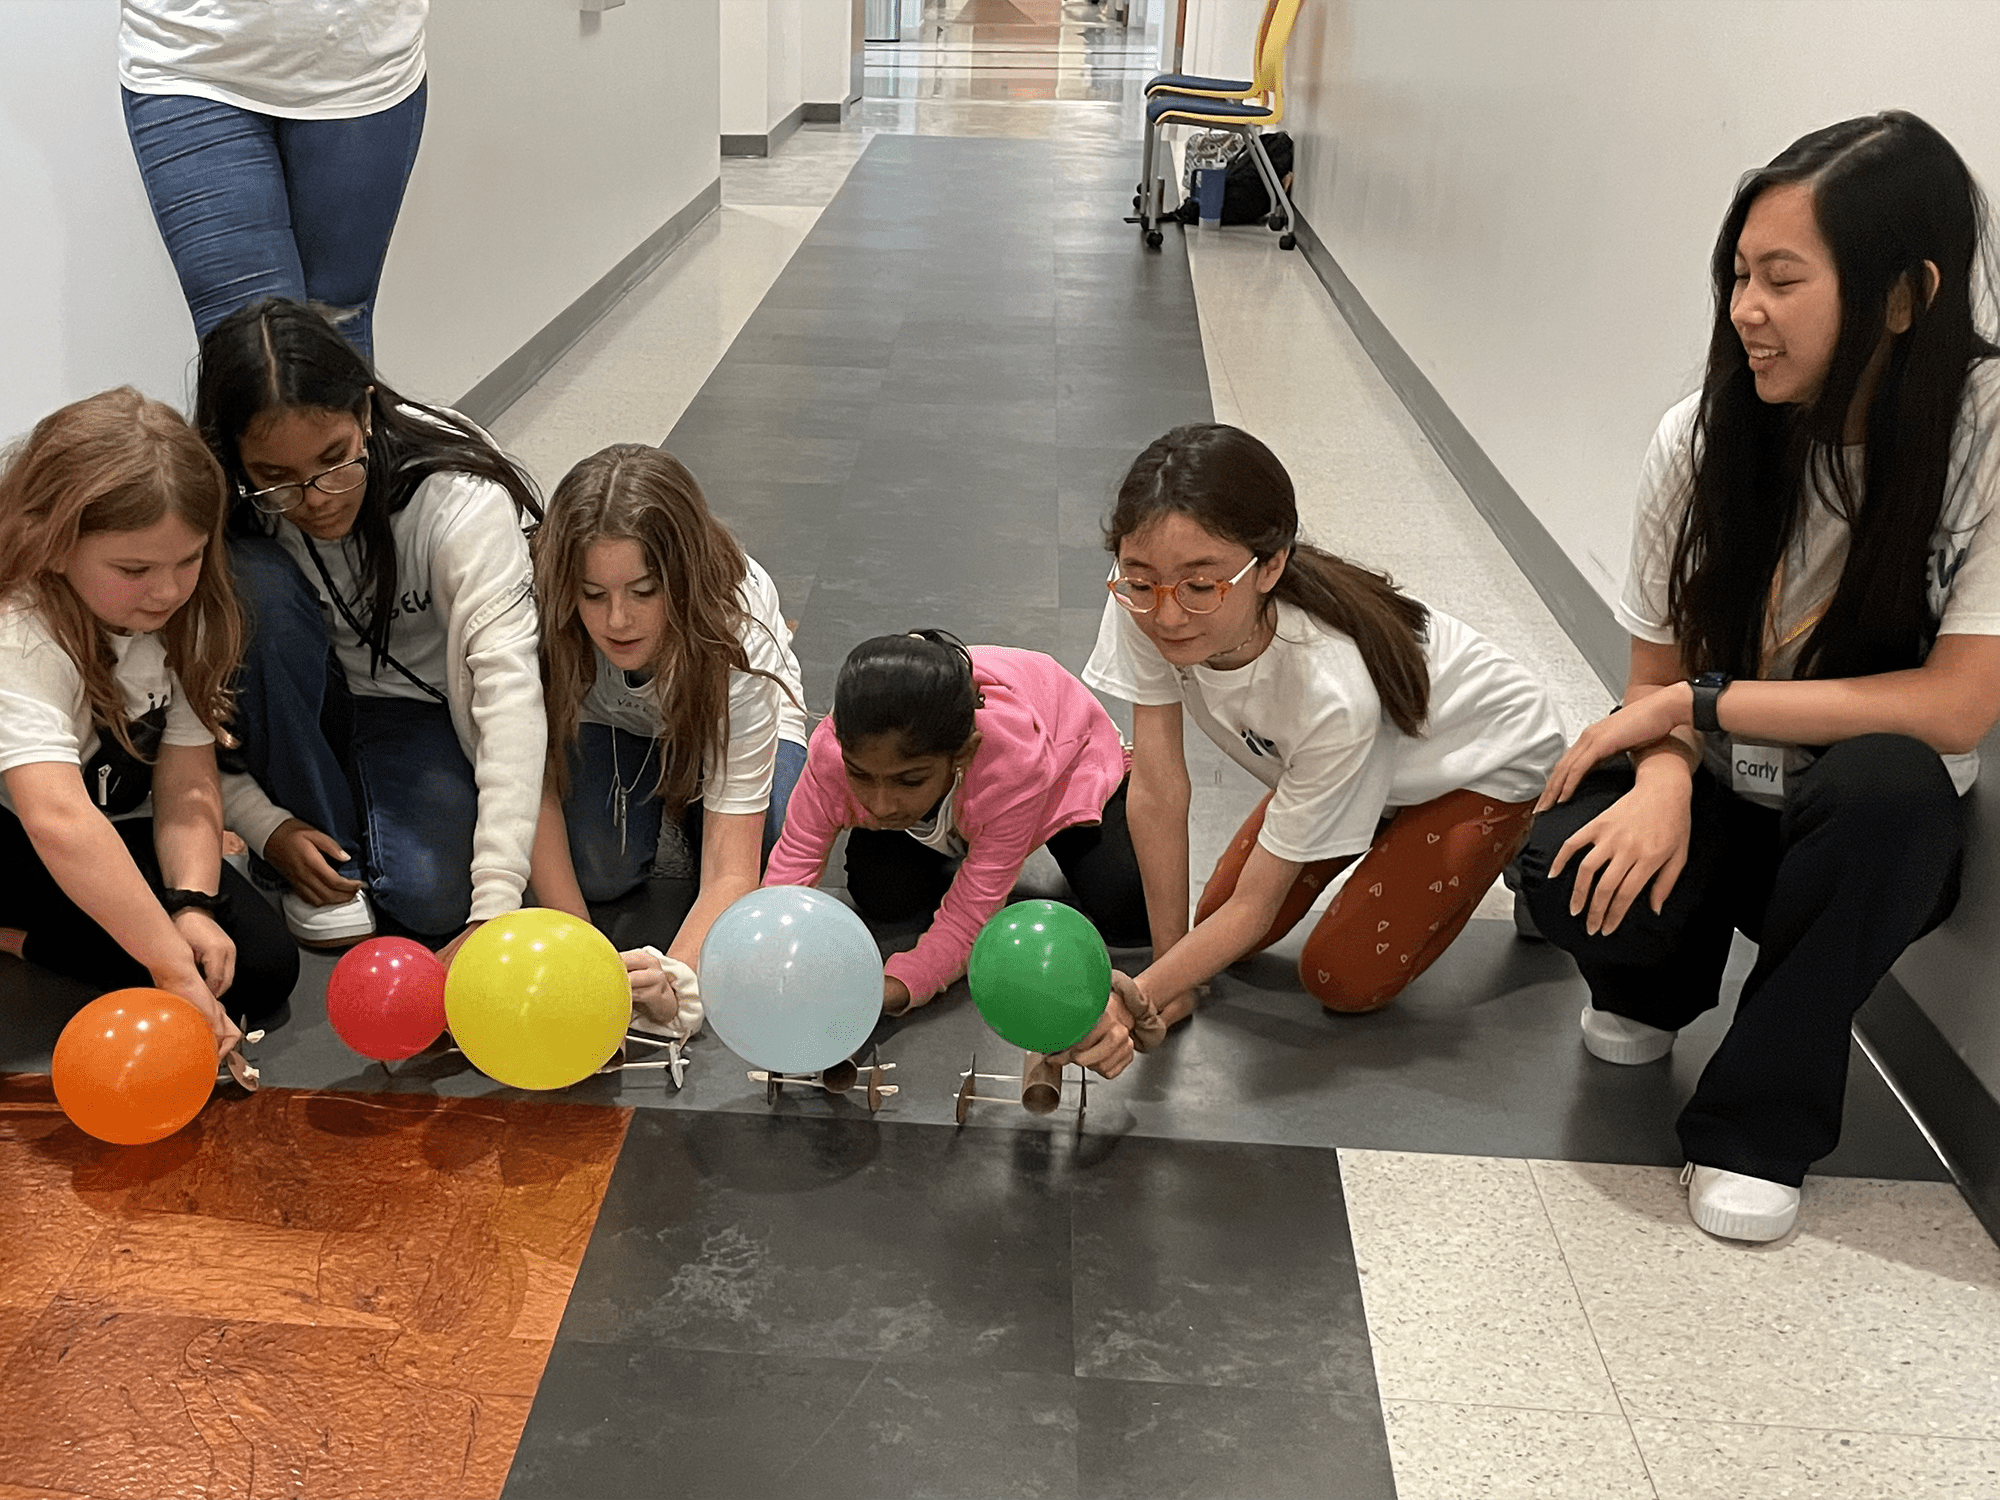 SWE volunteer Carly McDonald (right) helps young engineers get ready to test out the balloon cars they just built. (Photo: Embry-Riddle)